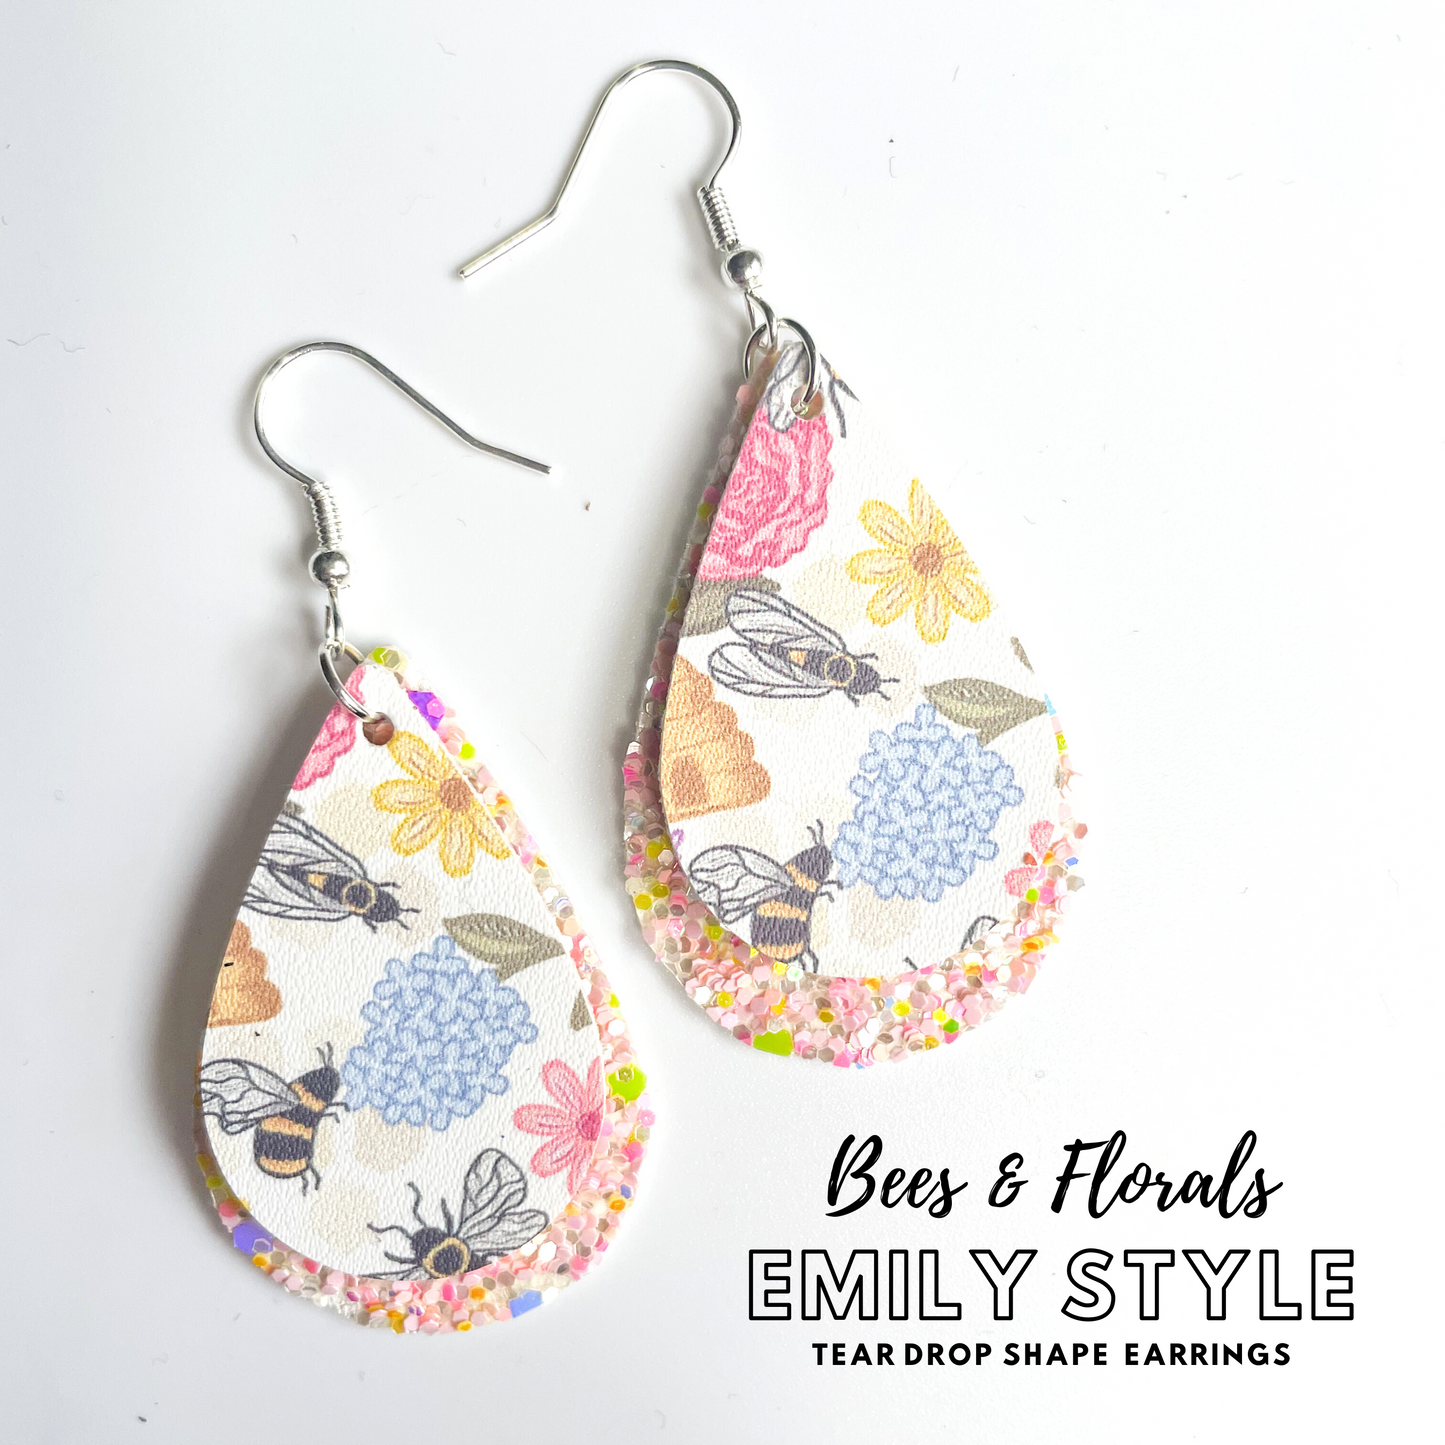 Bees and Florals Emily Style 2 Layer Dangle Earrings | Emily Style Dangle Earrings | Layered Teardrop Shape | Pink Honeycomb